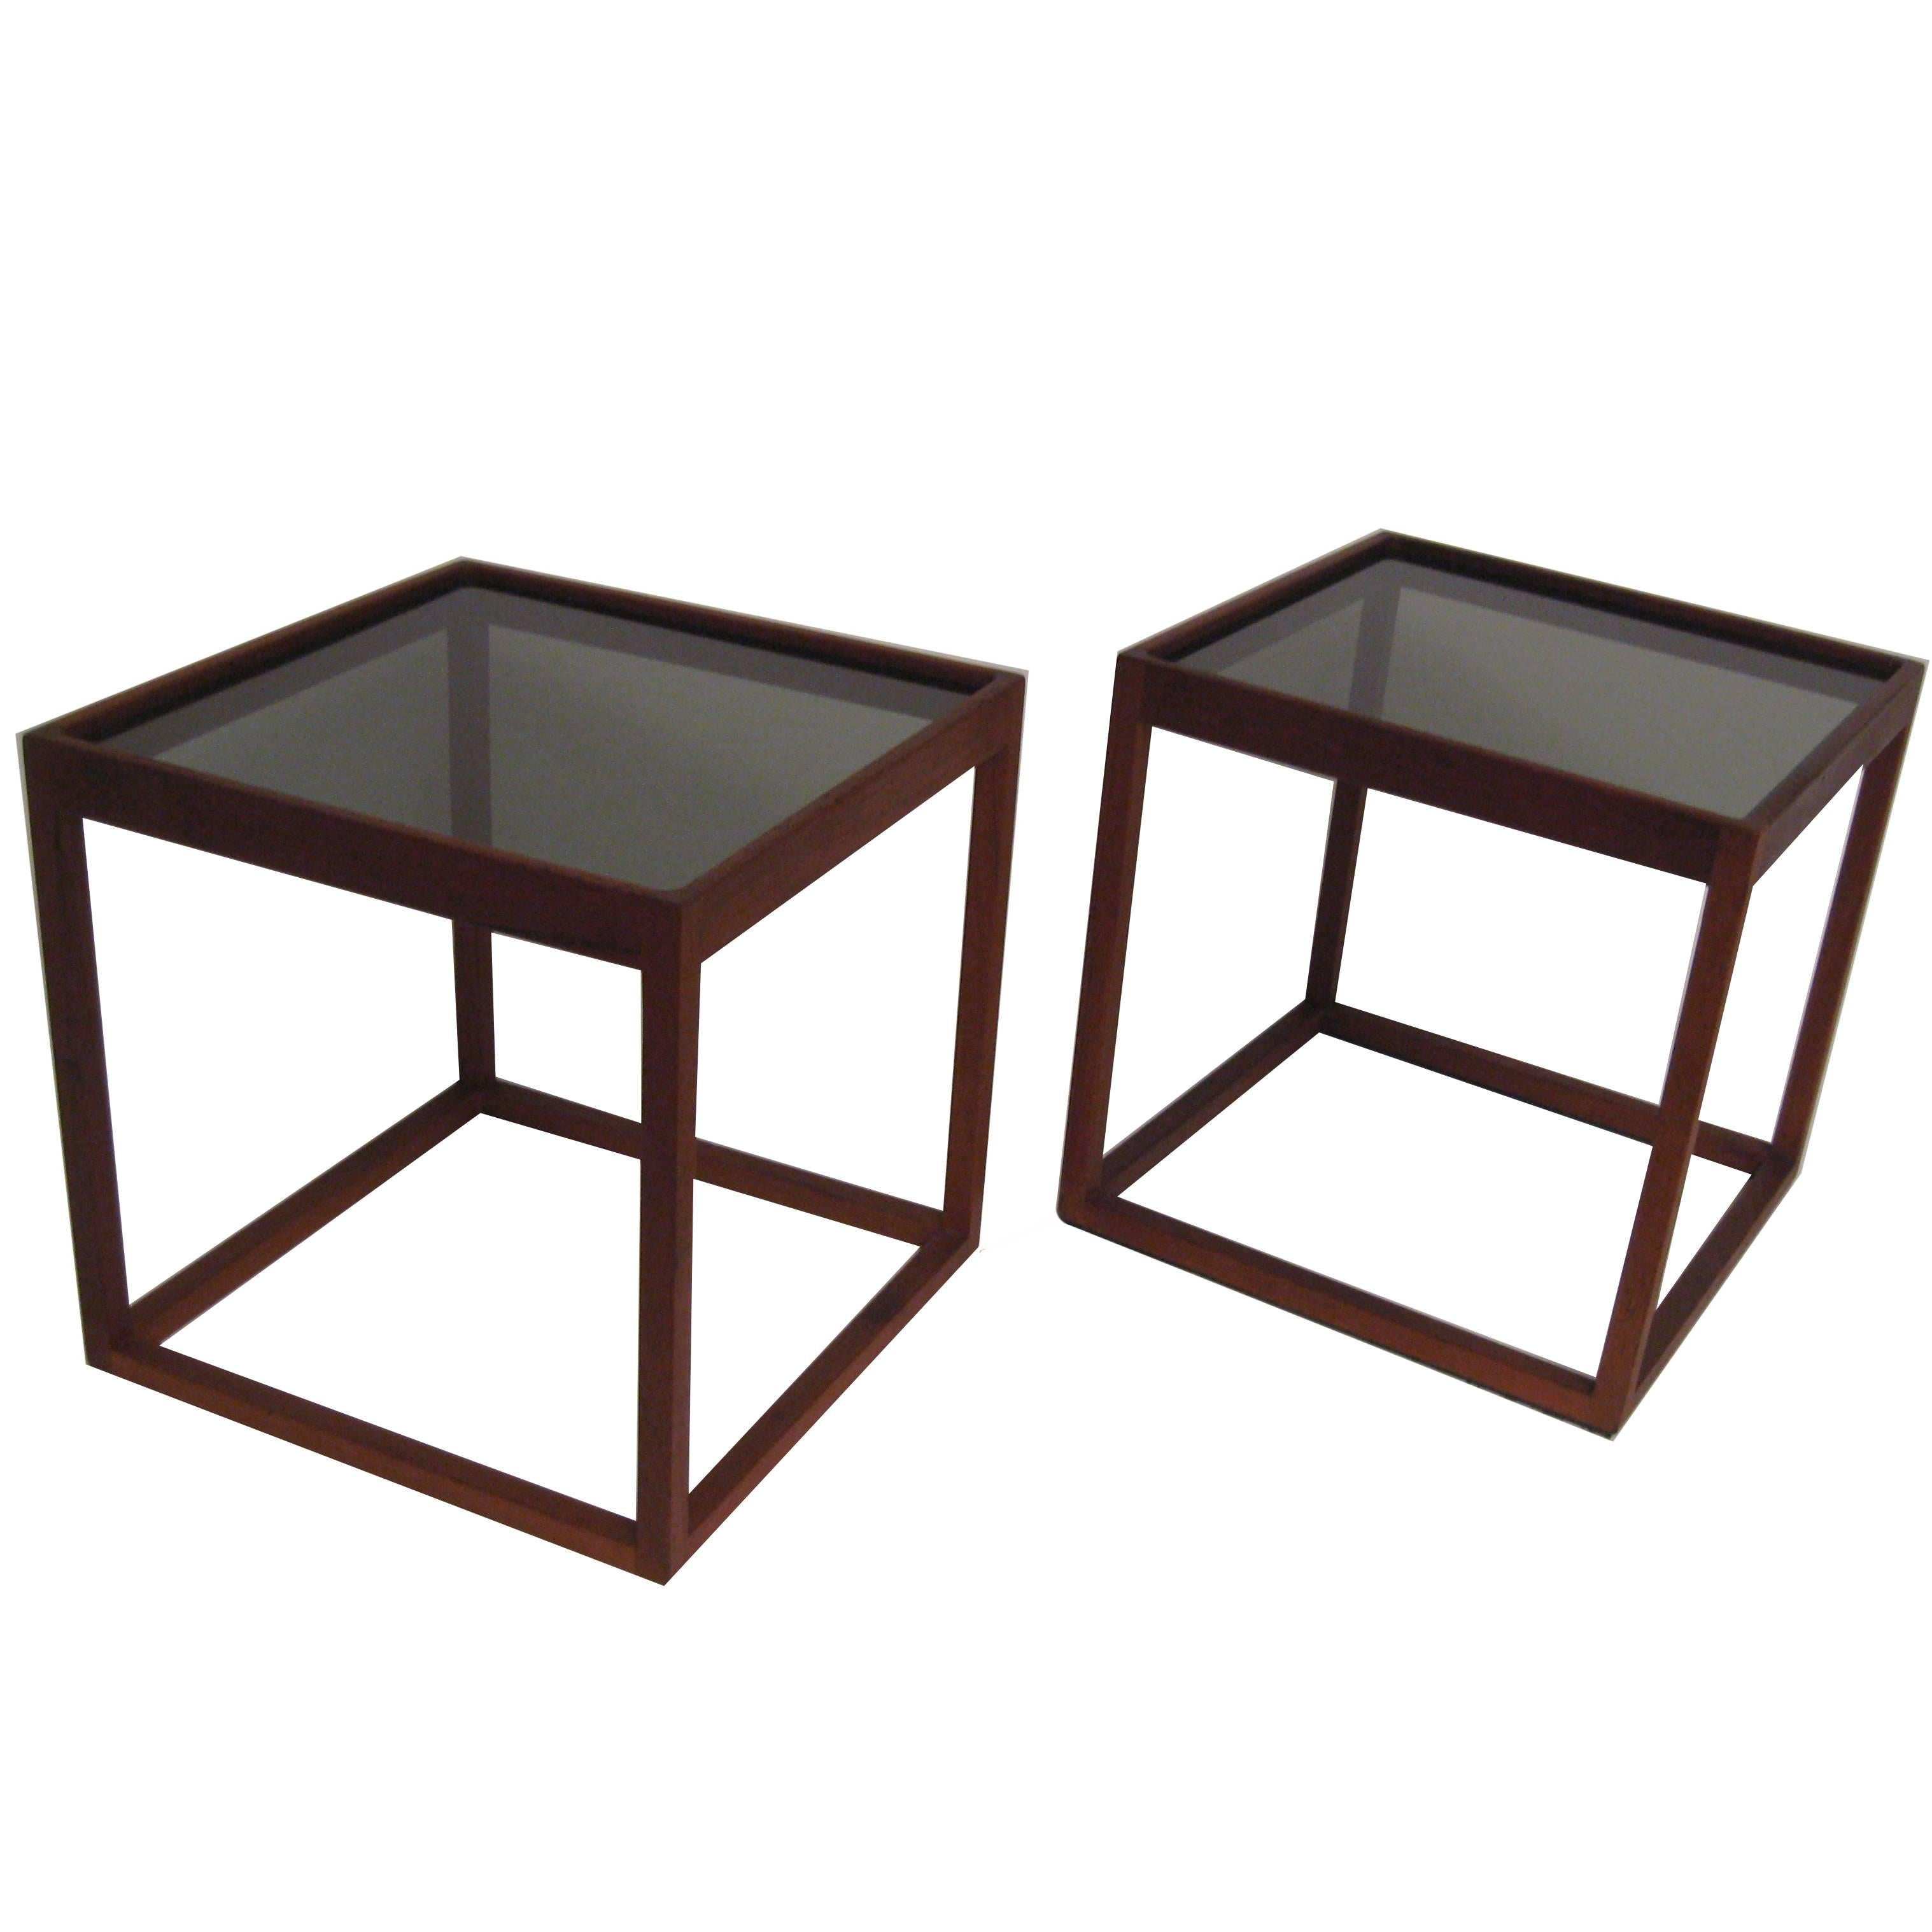 Danish Modern Teak and Smoked Glass Cube End Tables